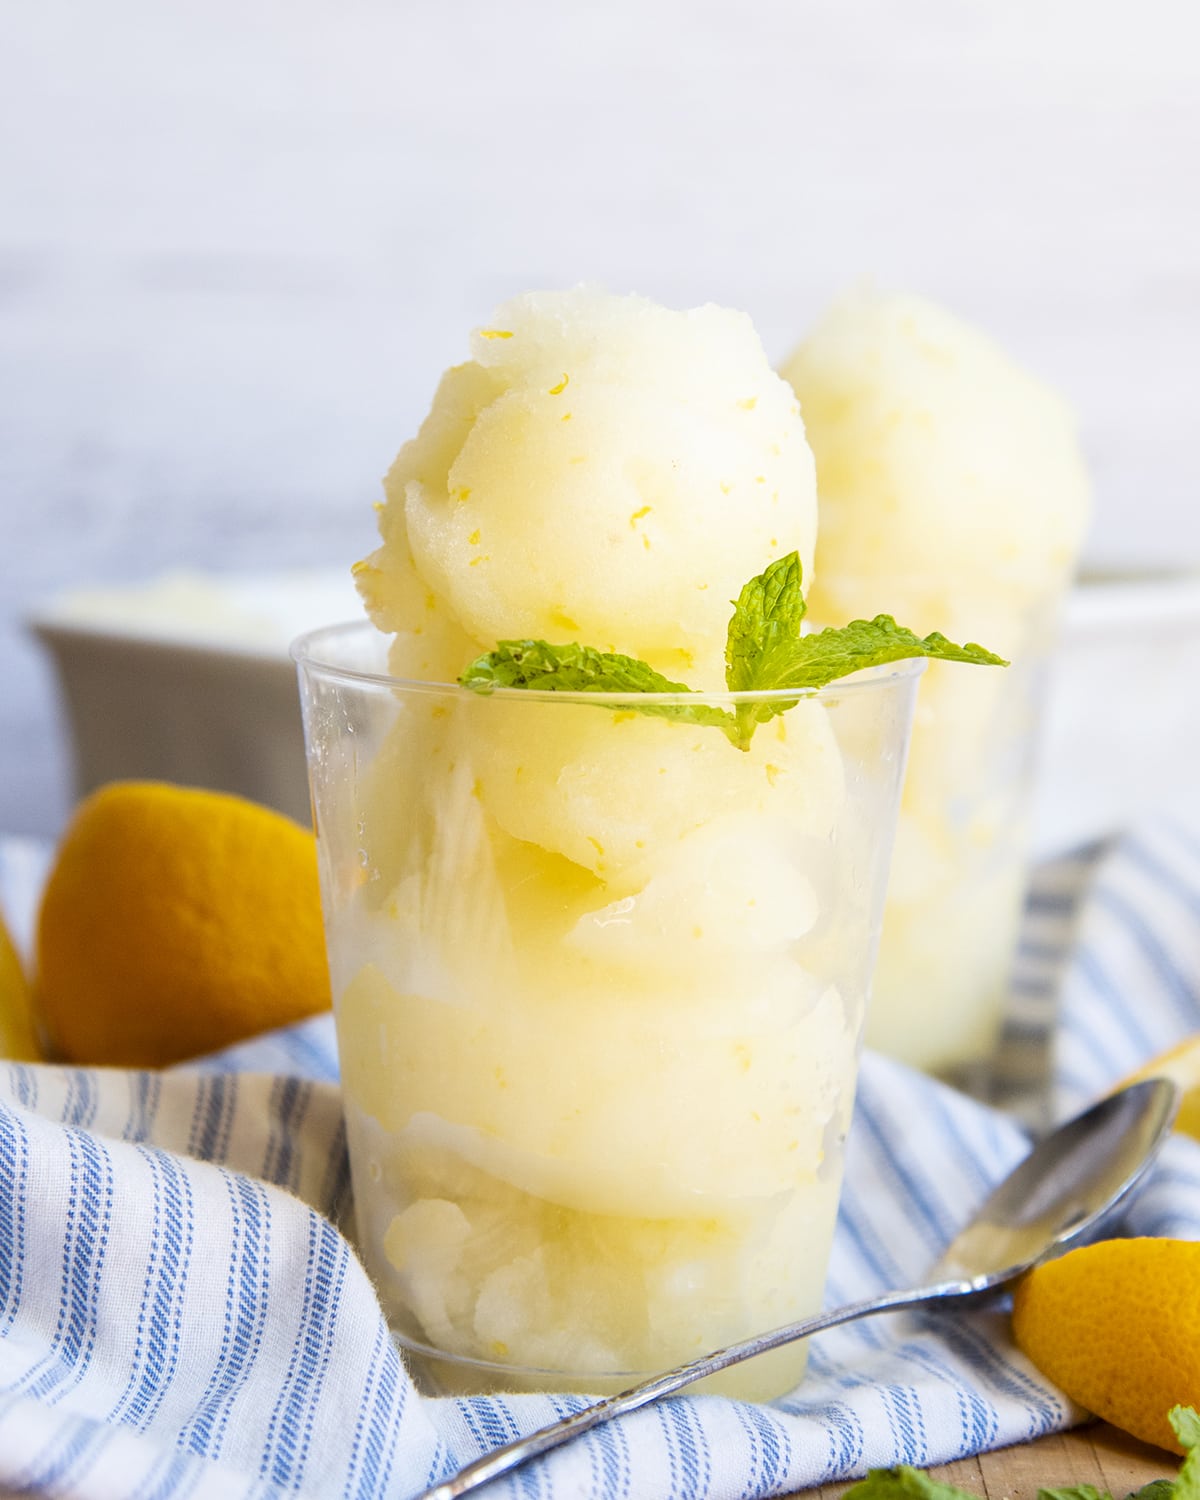 A clear cup full of three scoops of lemon sorbet topped with a mint leaf.